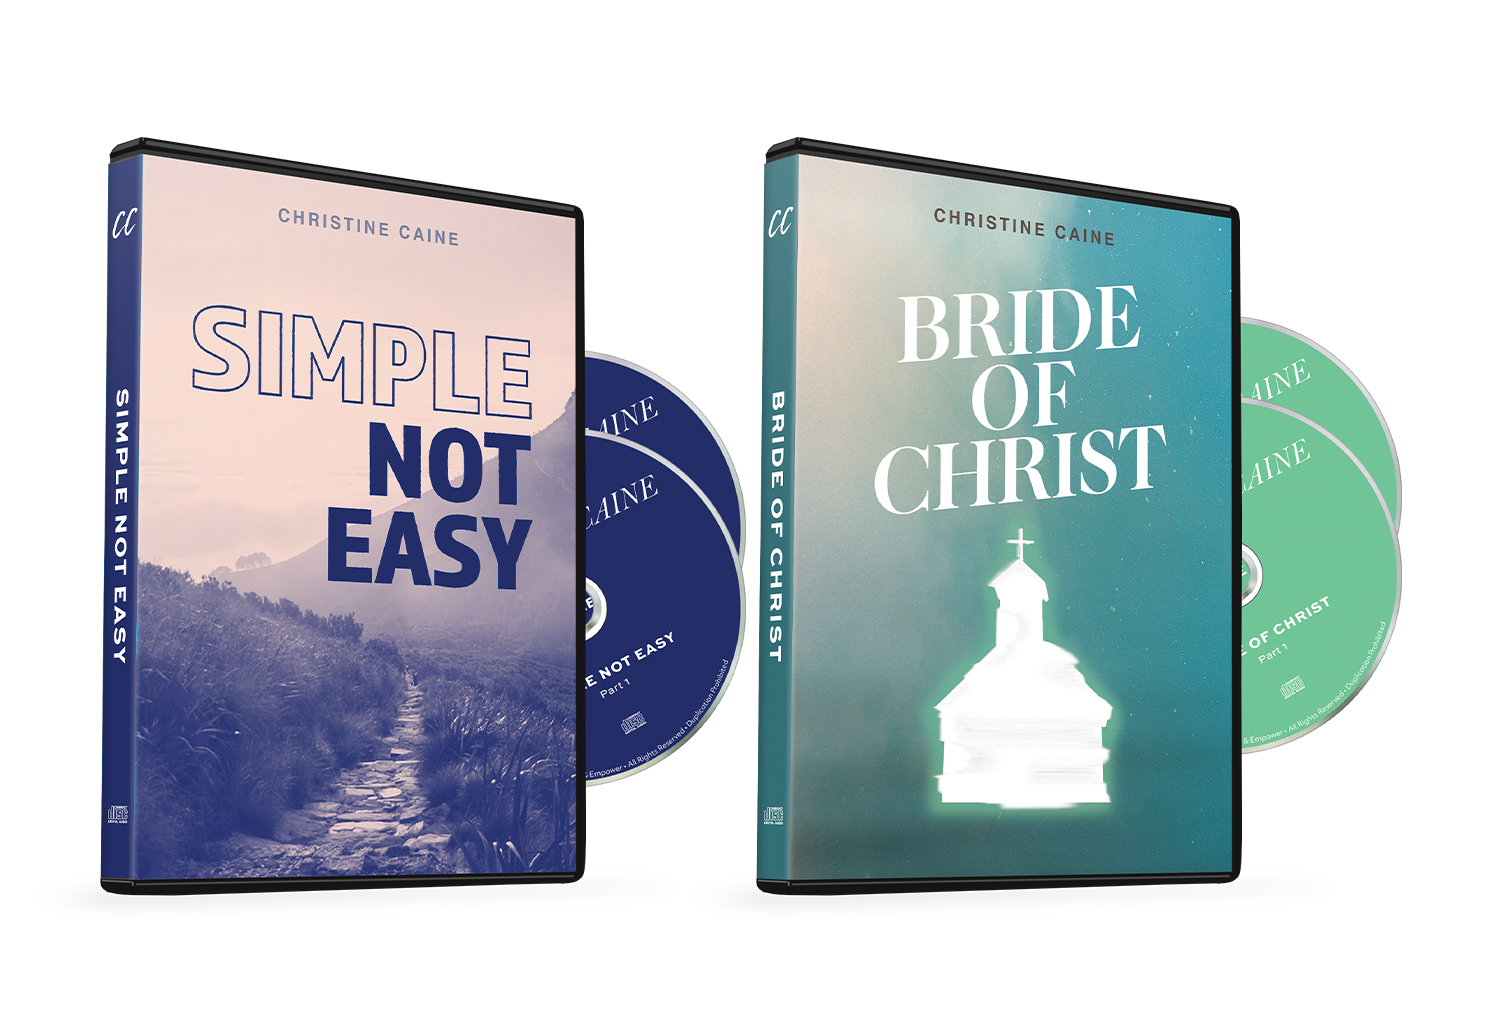 Bride of Christ and Simple, Not Easy by Christine Caine on TBN